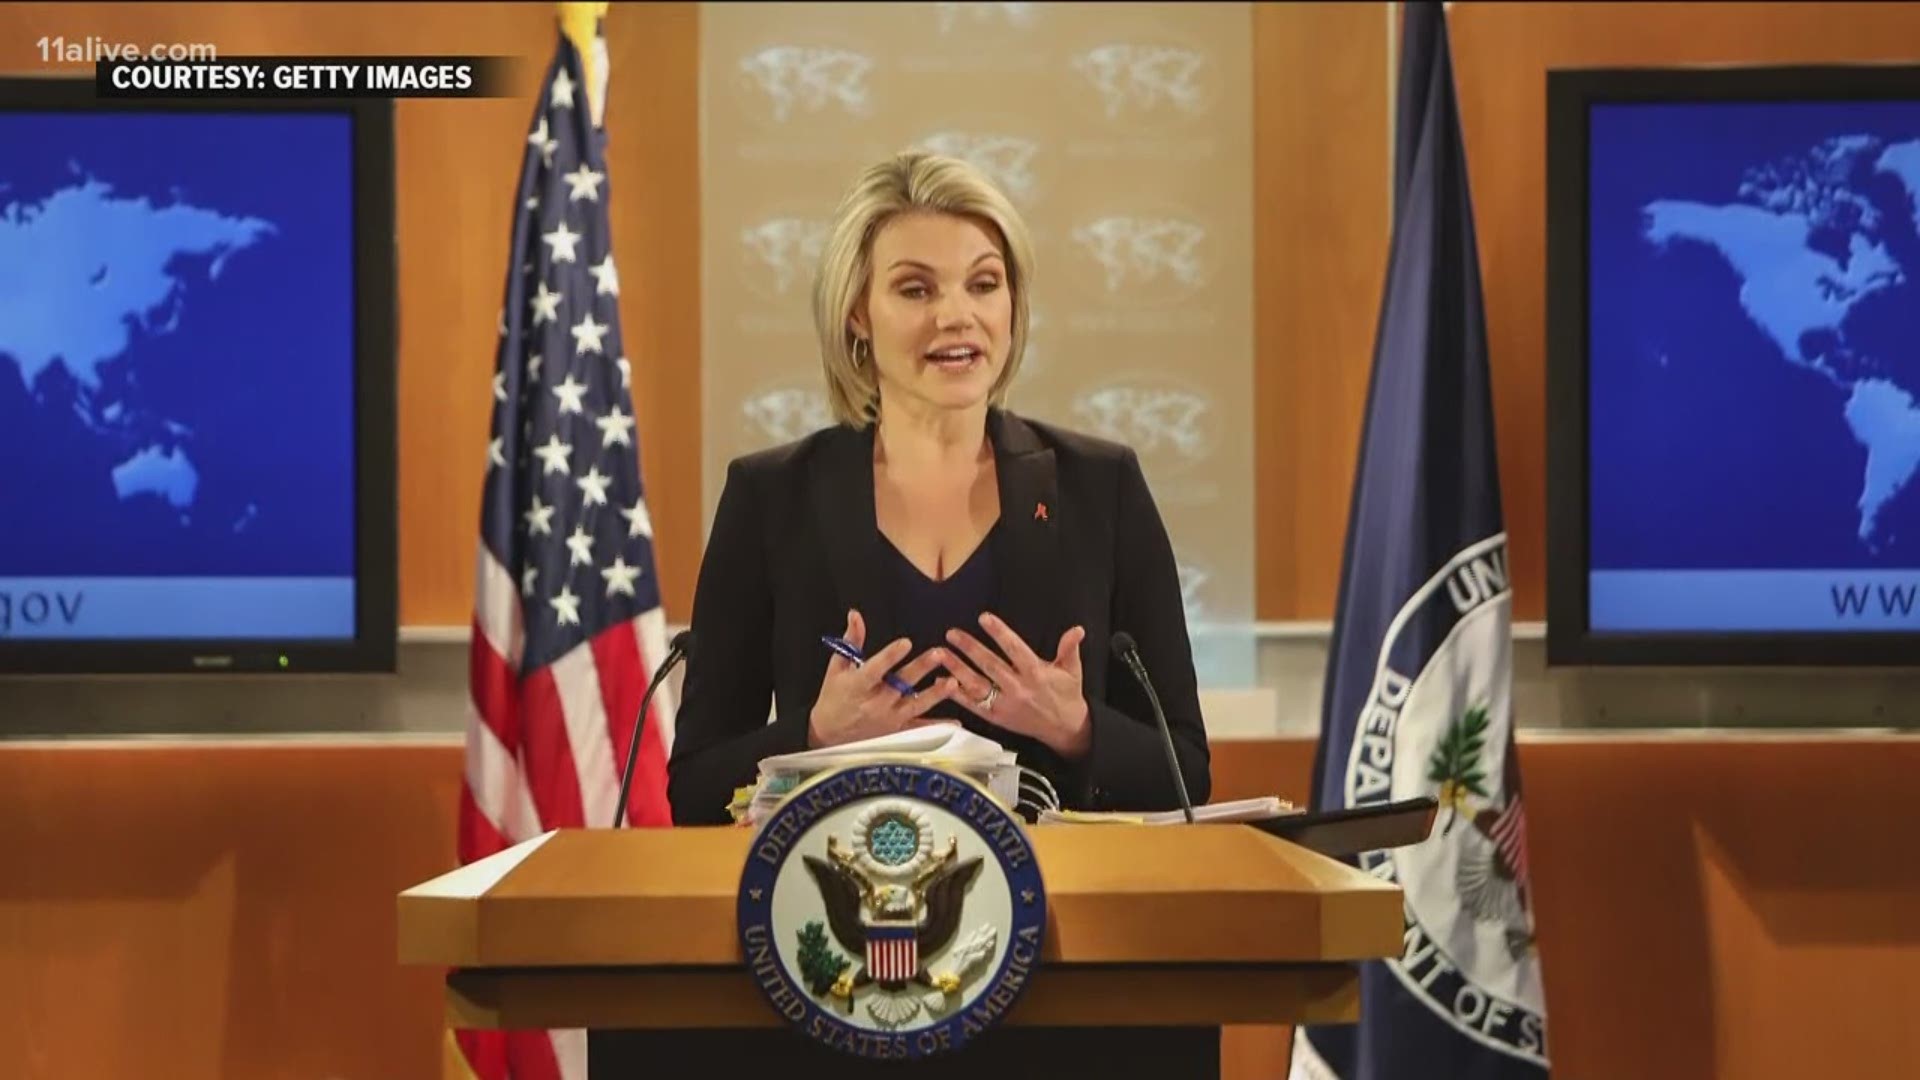 President Donald Trump is expected to announce he will nominate State Department spokeswoman Heather Nauert to be the next U.S. ambassador to the United Nations.